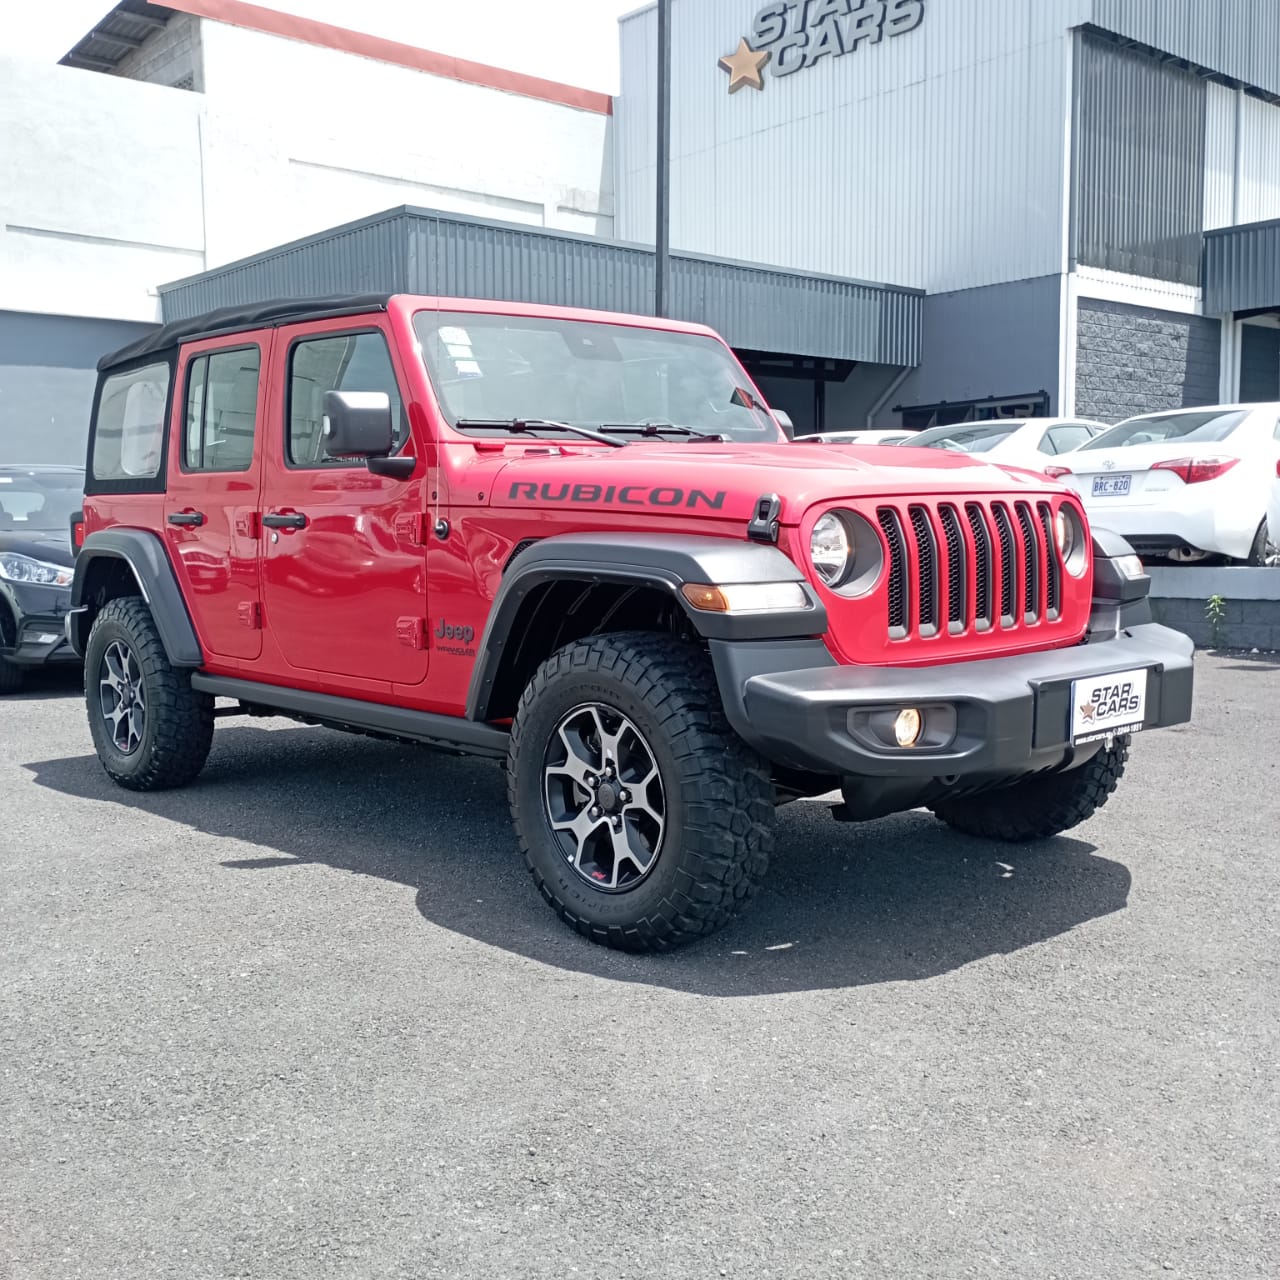 https://starcars.com/listing/jeep-wrangler-rubicon-unlimited-2019/